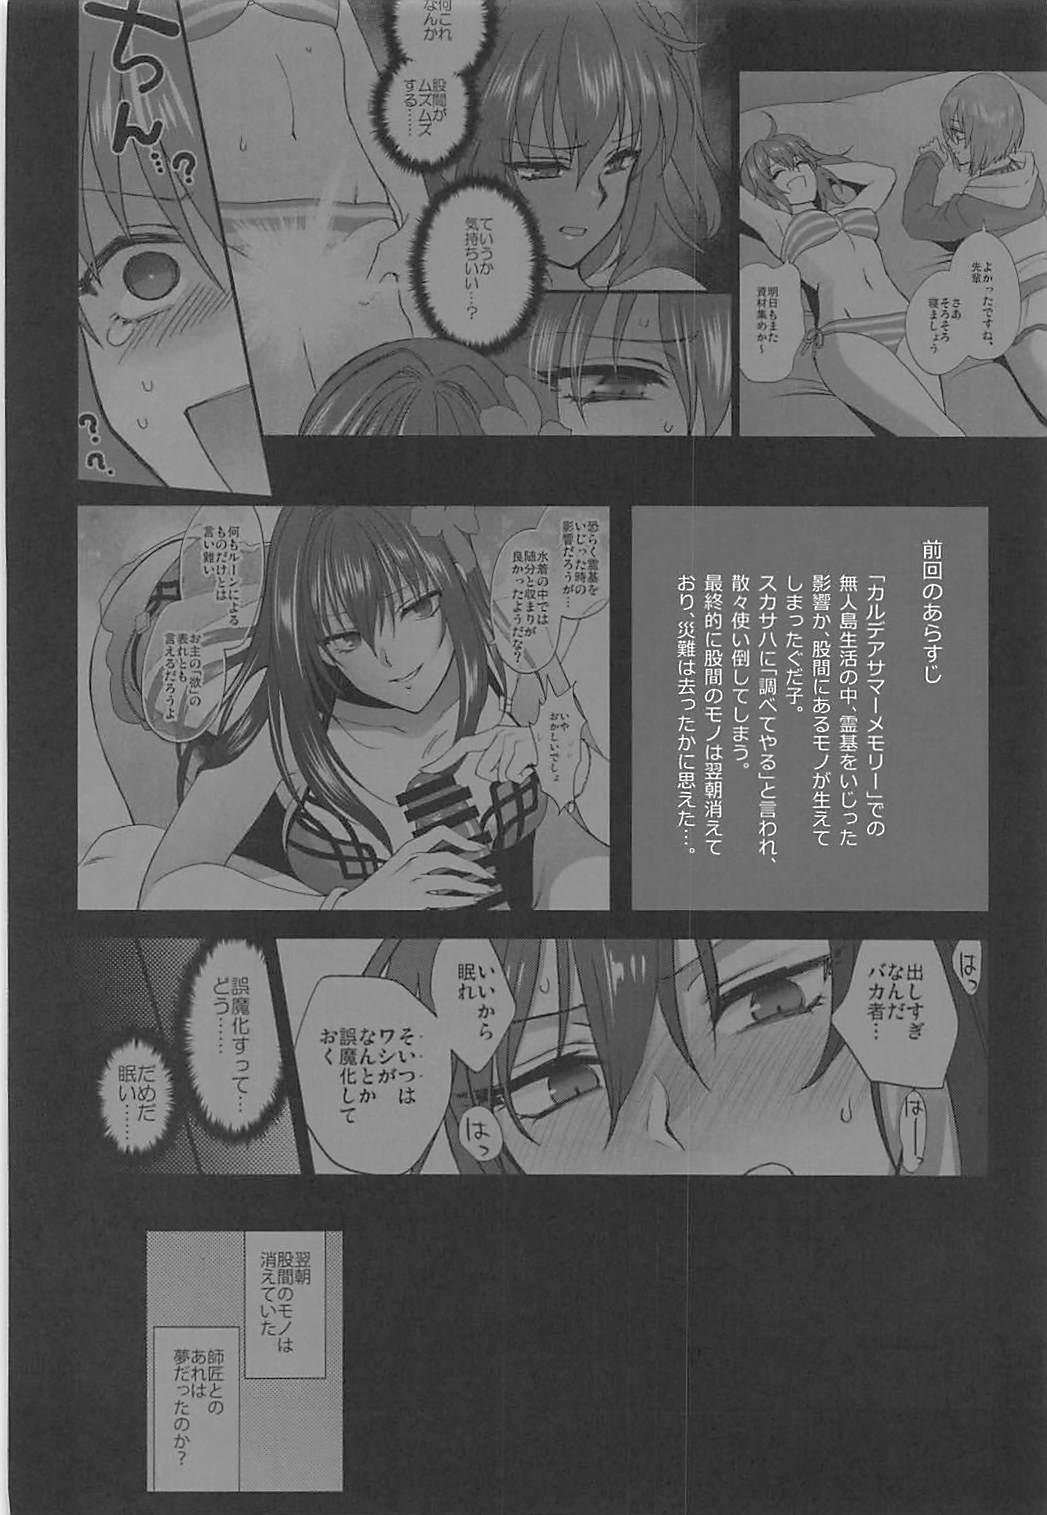 Groupsex In my room. - Fate grand order Gay Ass Fucking - Page 3